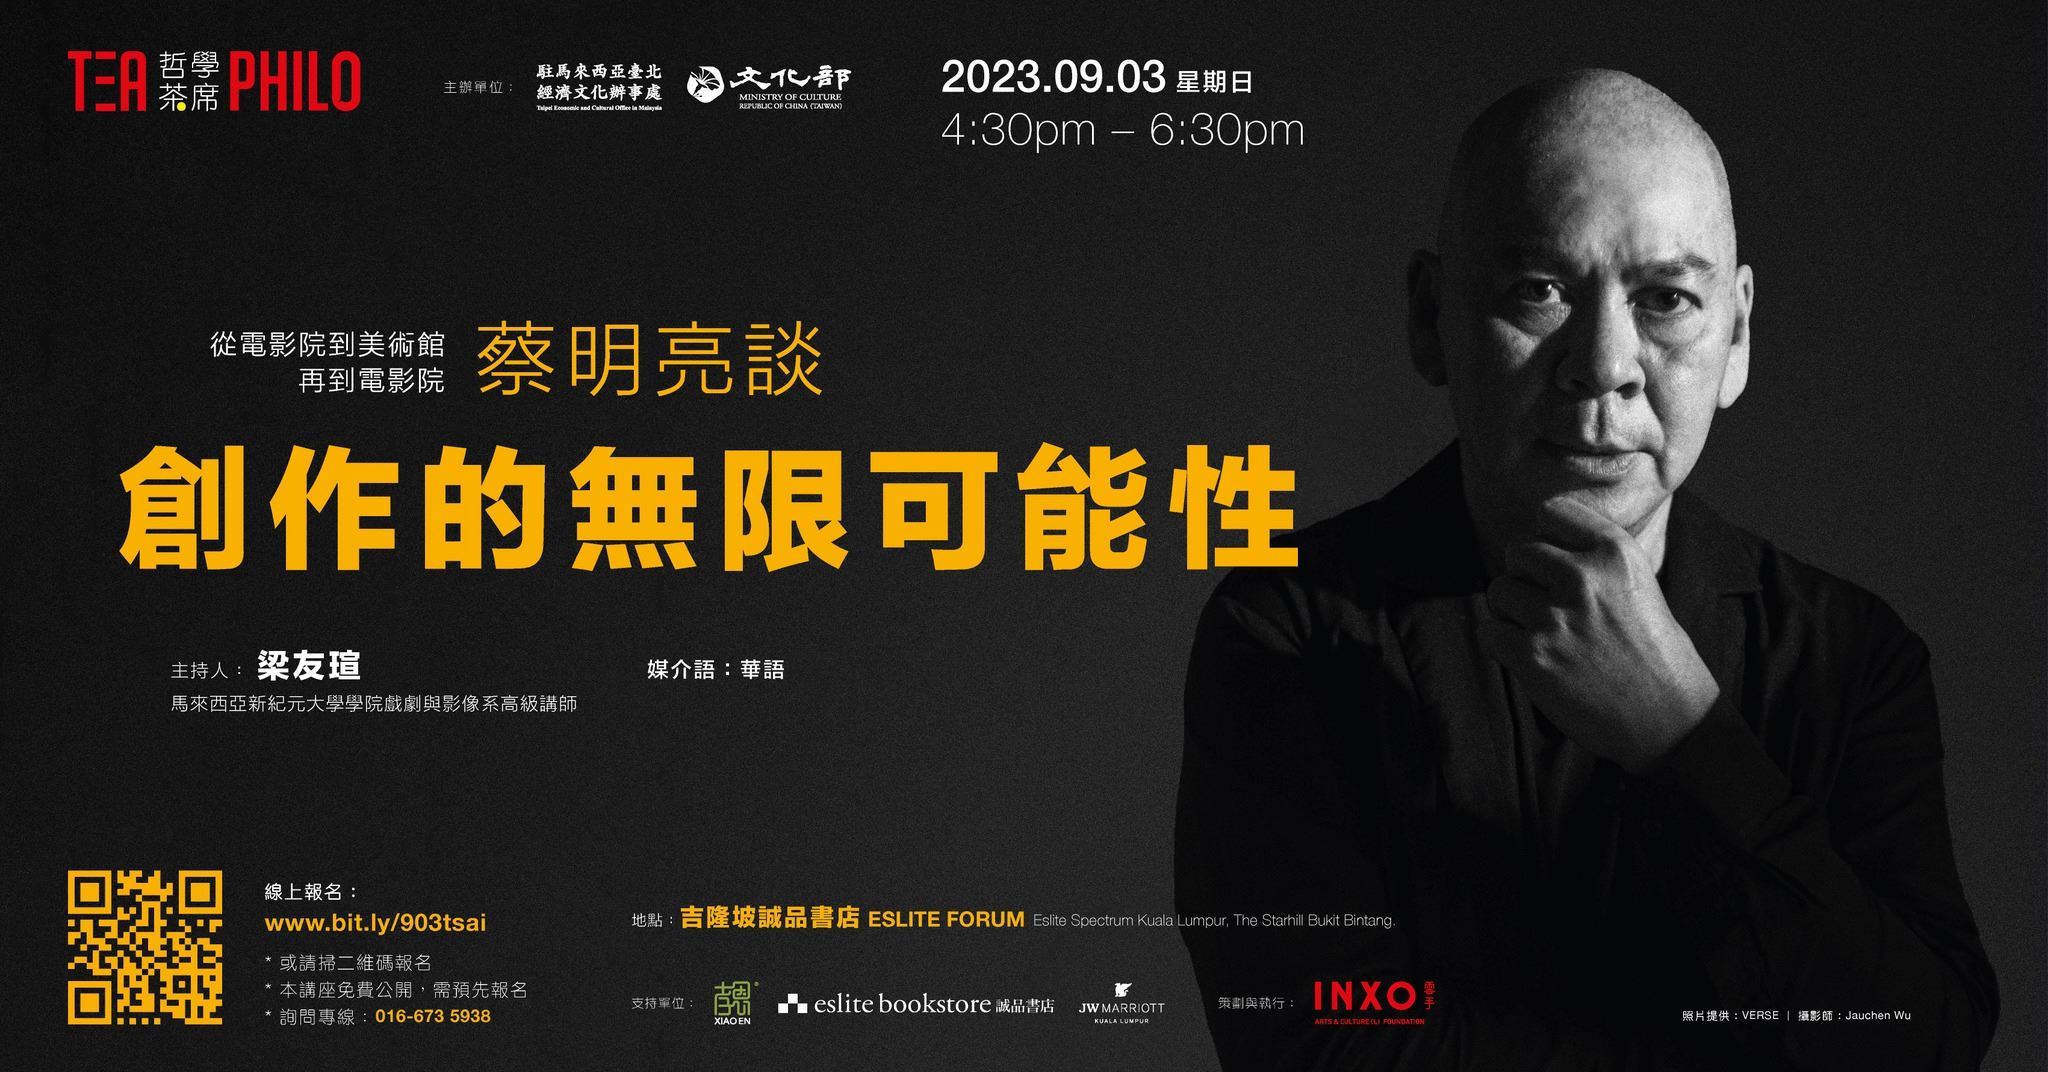 Tea Philo invites director Tsai Ming-liang to share his theatrical journey